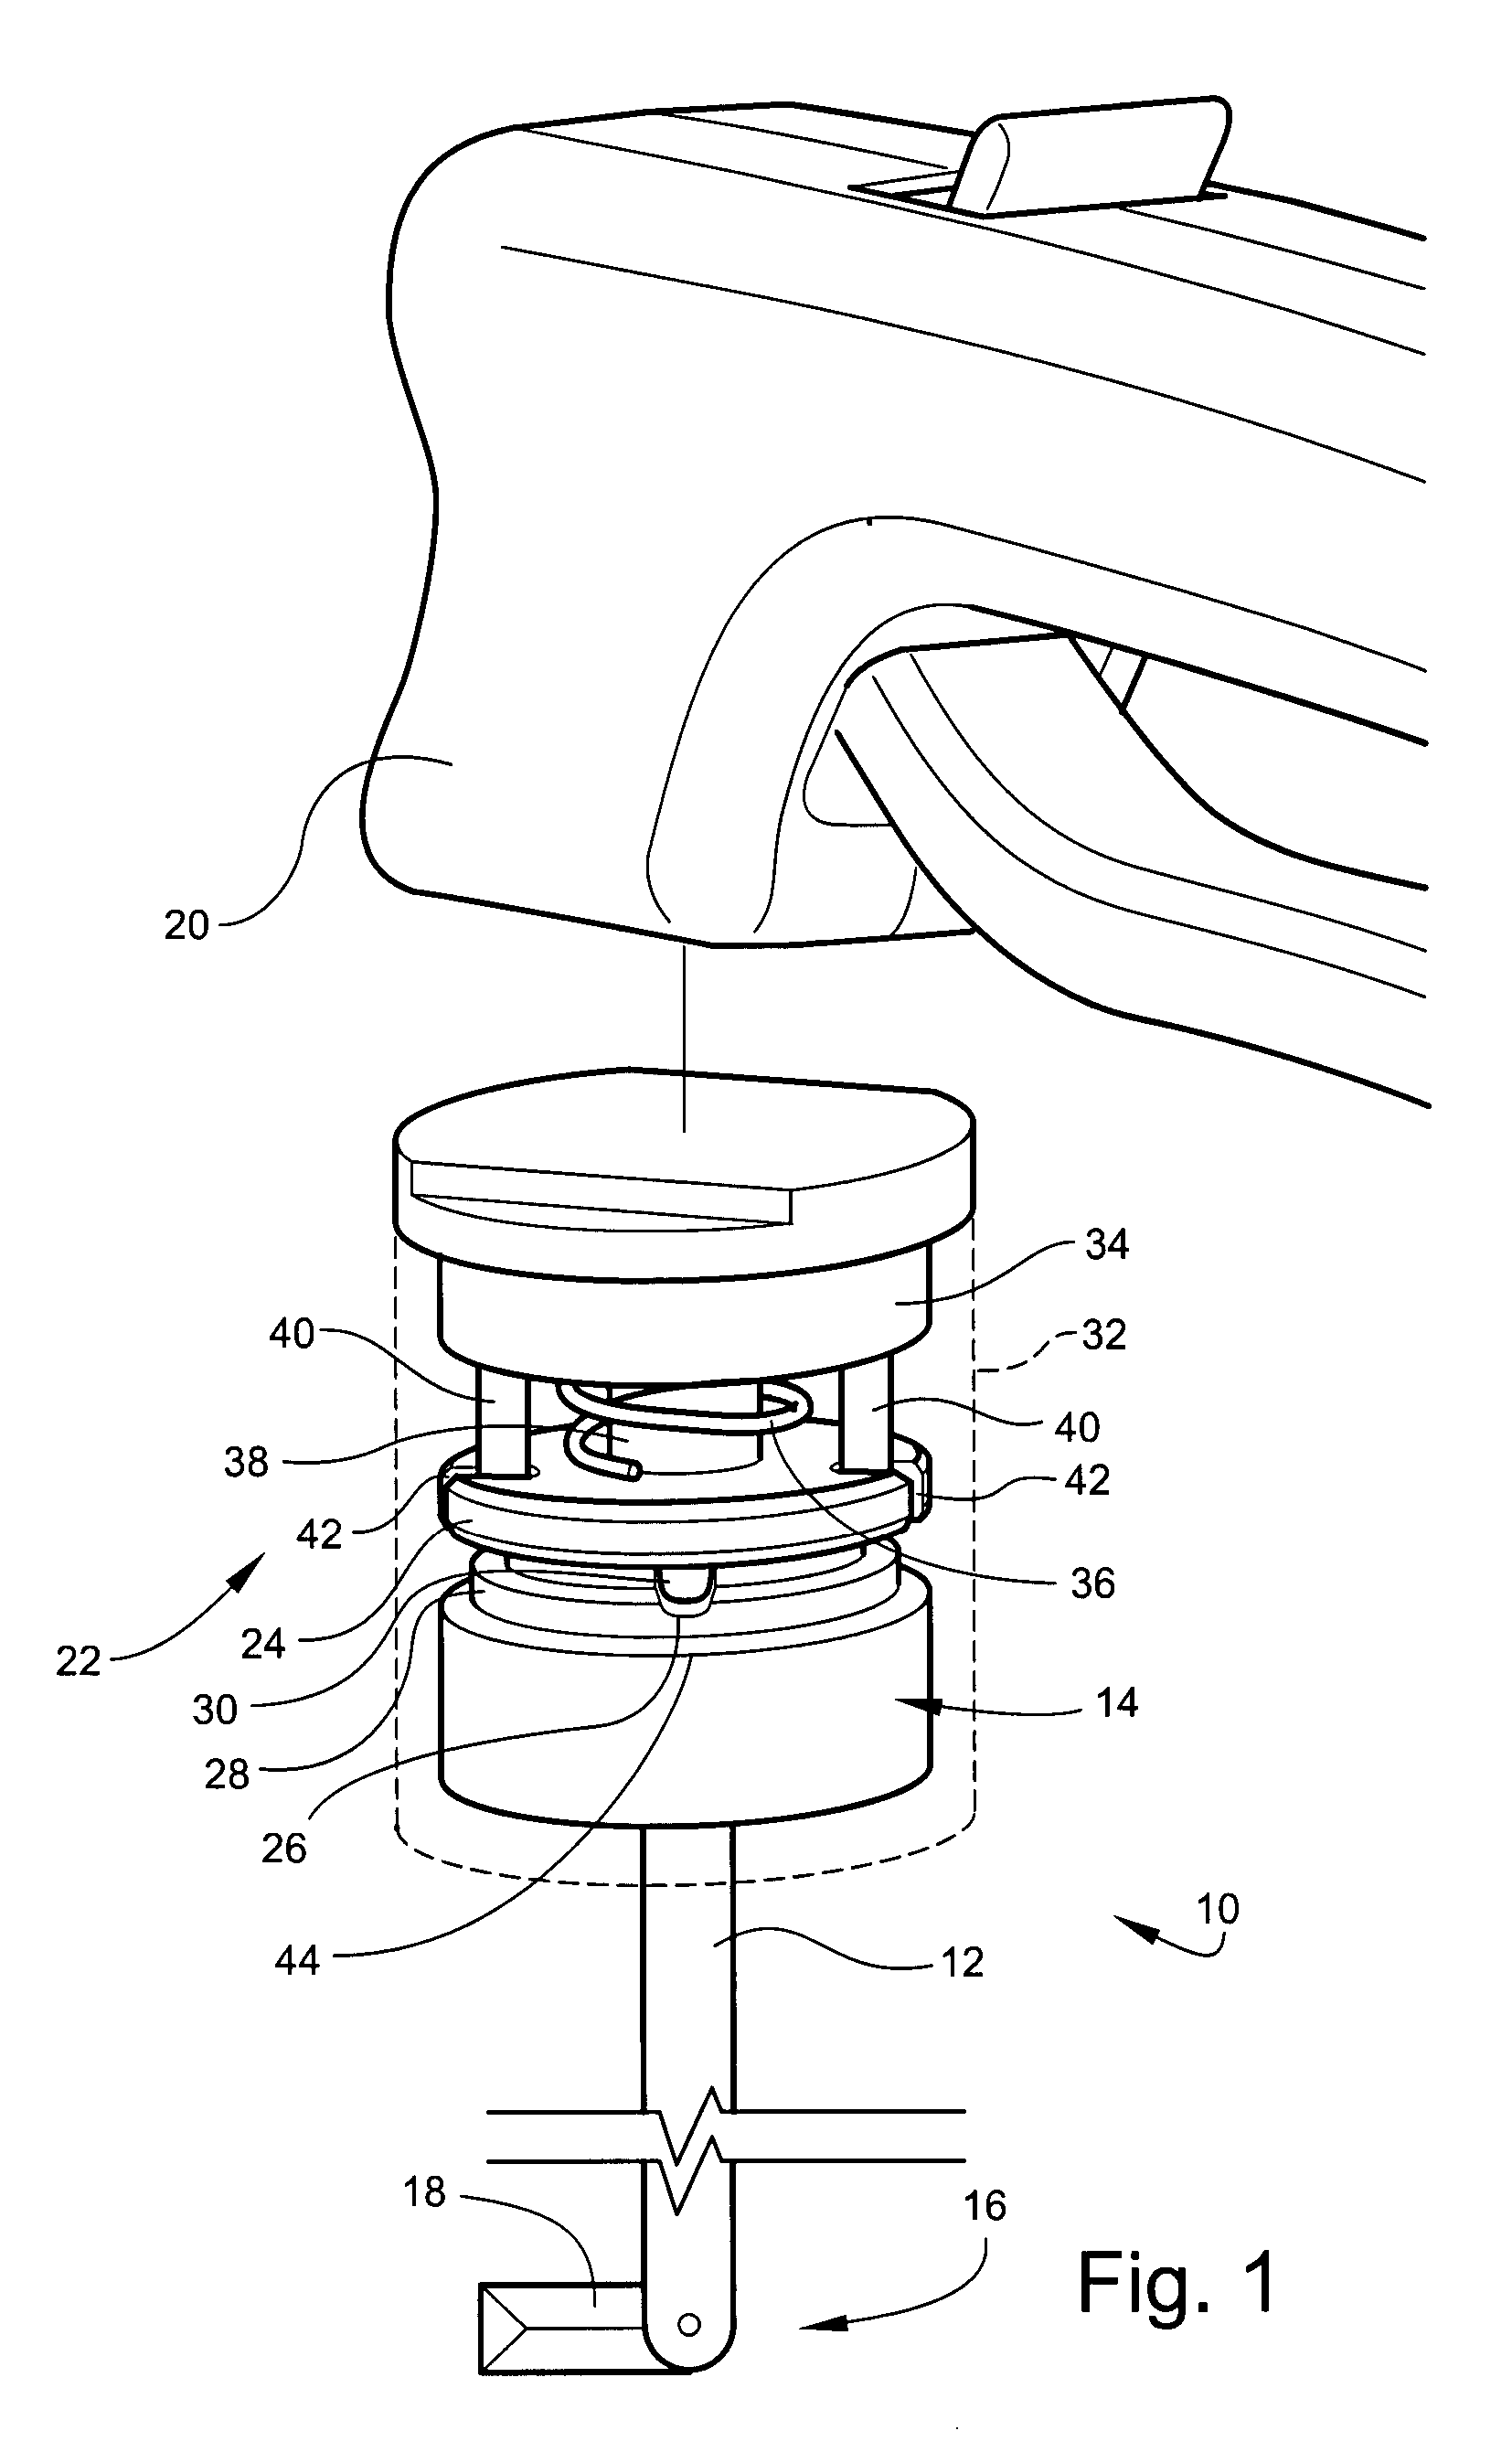 Axial load limiting system and methods